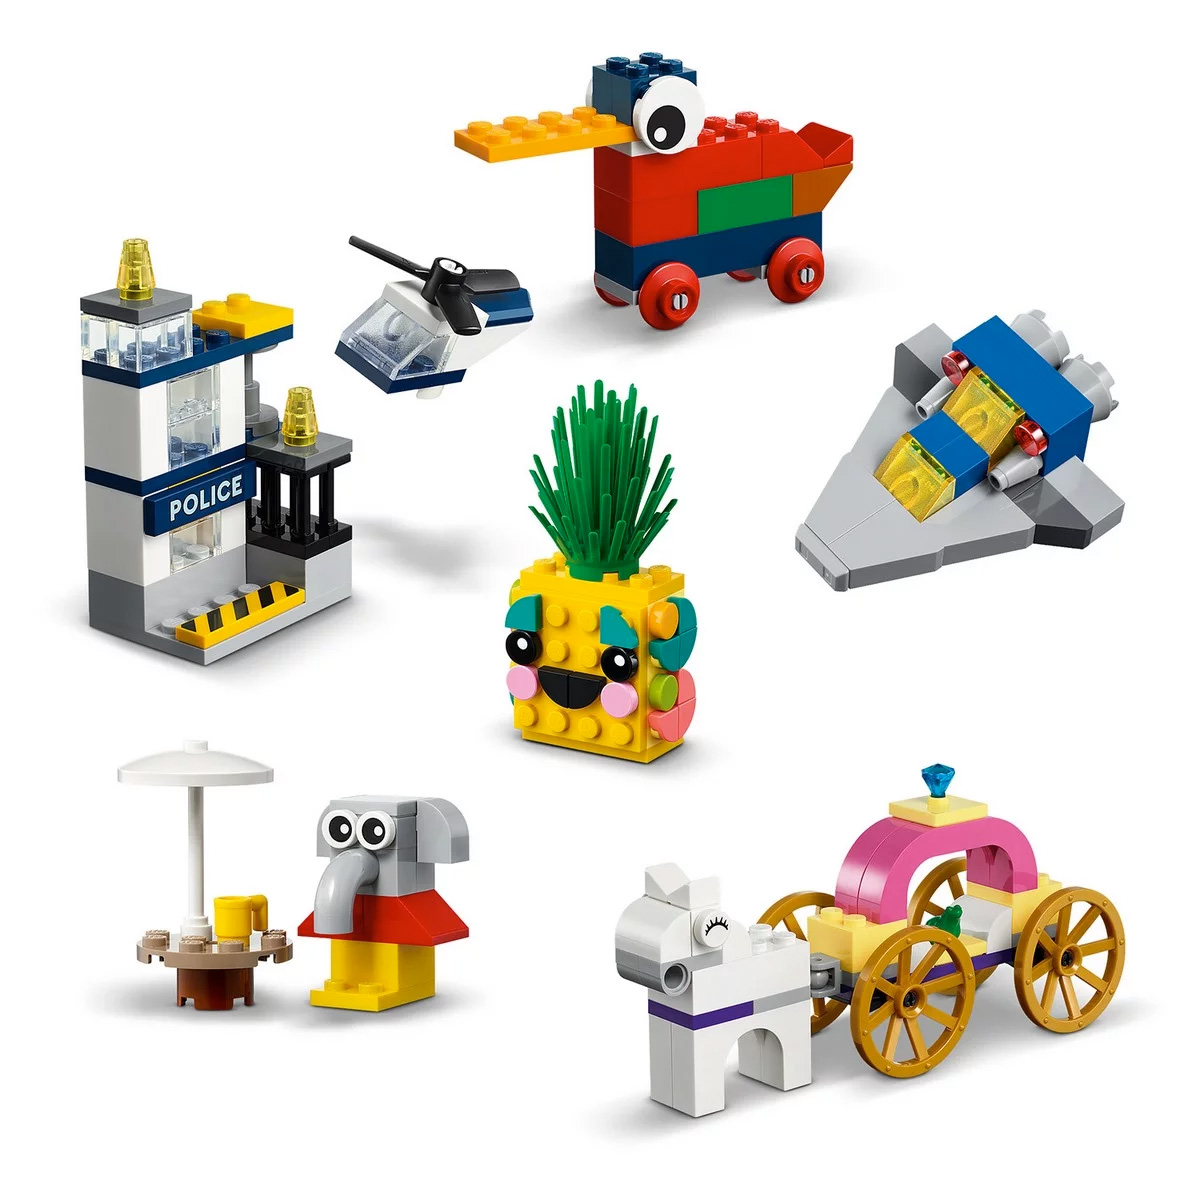 LEGO Celebrating 90 Years of Play! - The Kickz Stand